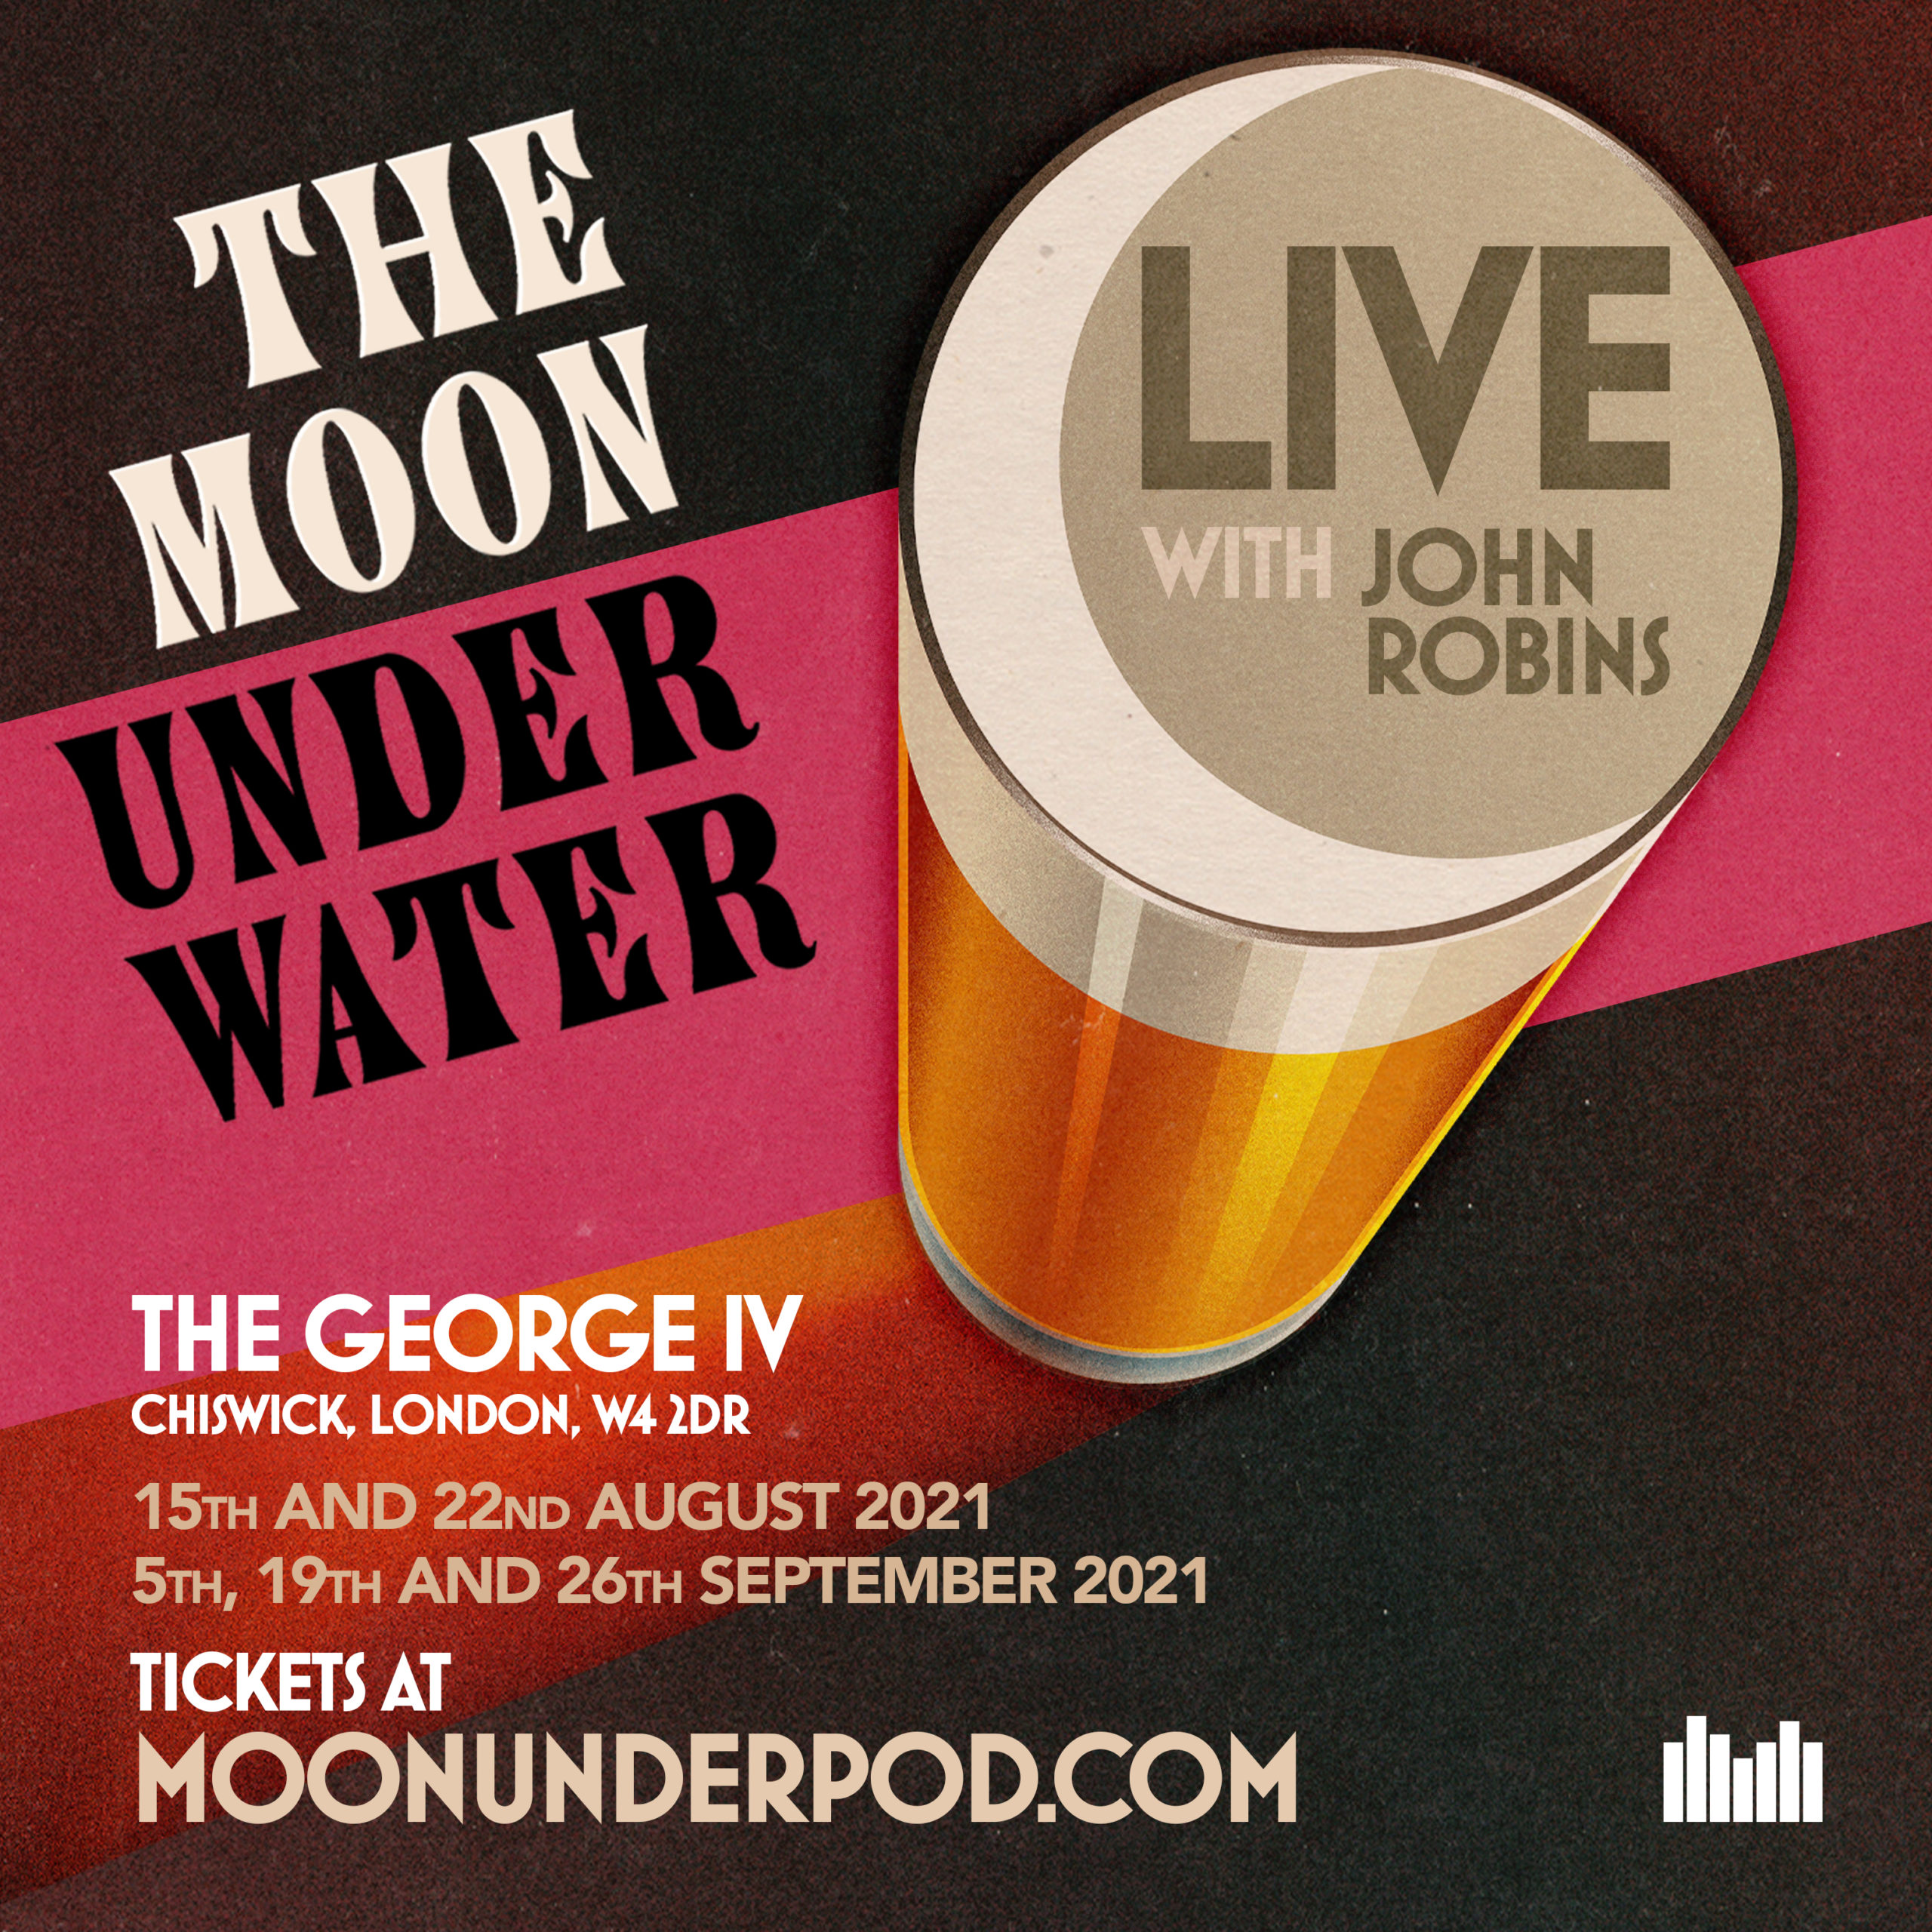 Tickets on sale for The Moon Under Water Live » John Robins